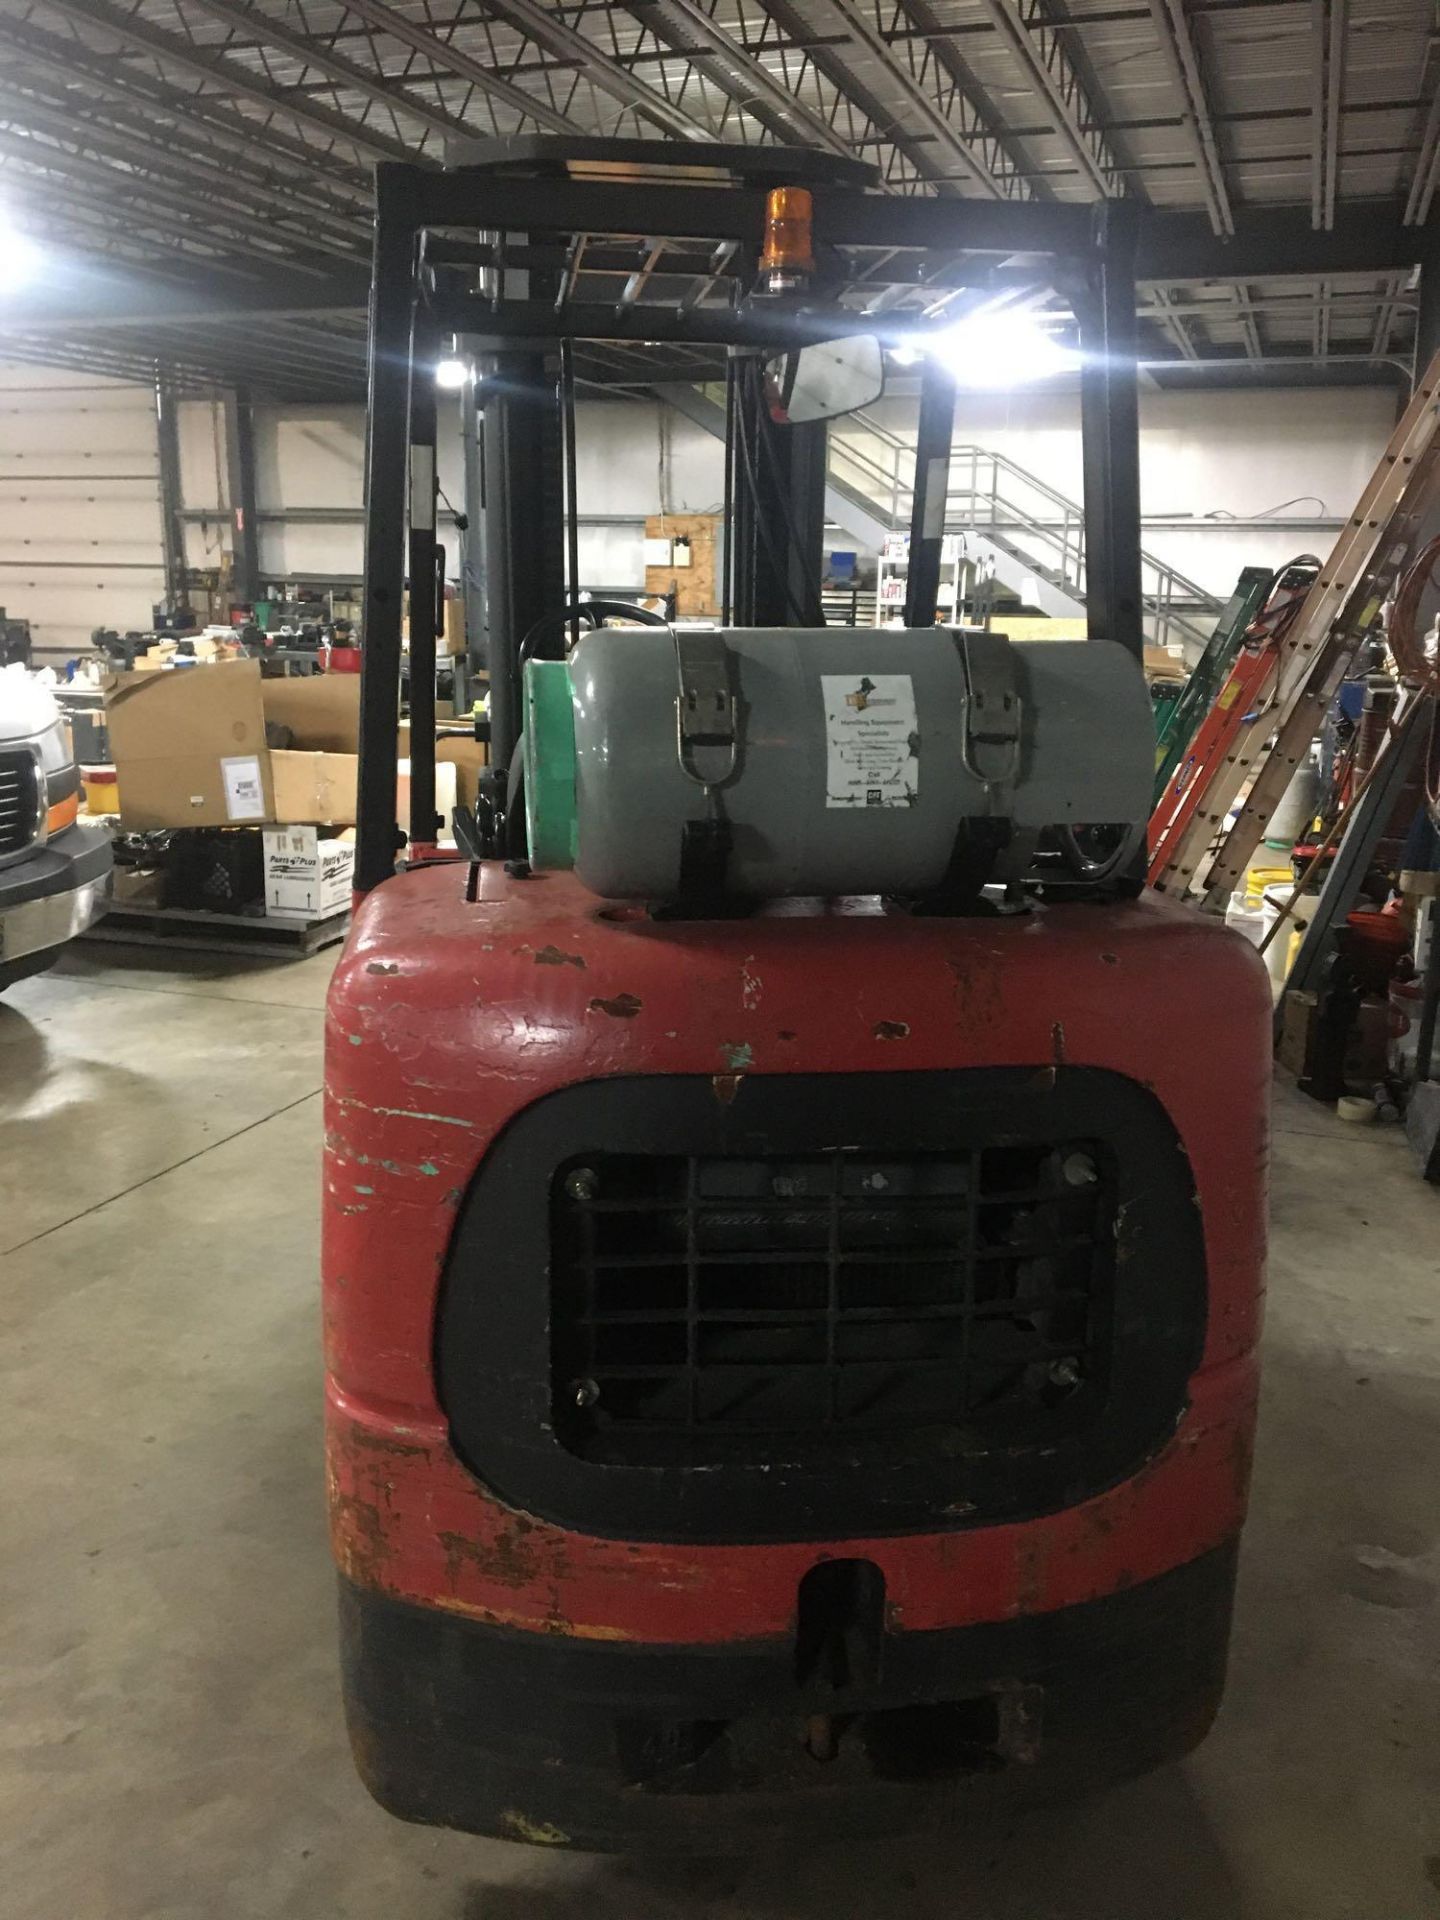 Propane Forklift, Mitsubishi, FGC40K, Max Ht 209", Max Cap 7100lbs, 11053 Hrs Started and Moved. - Image 5 of 9